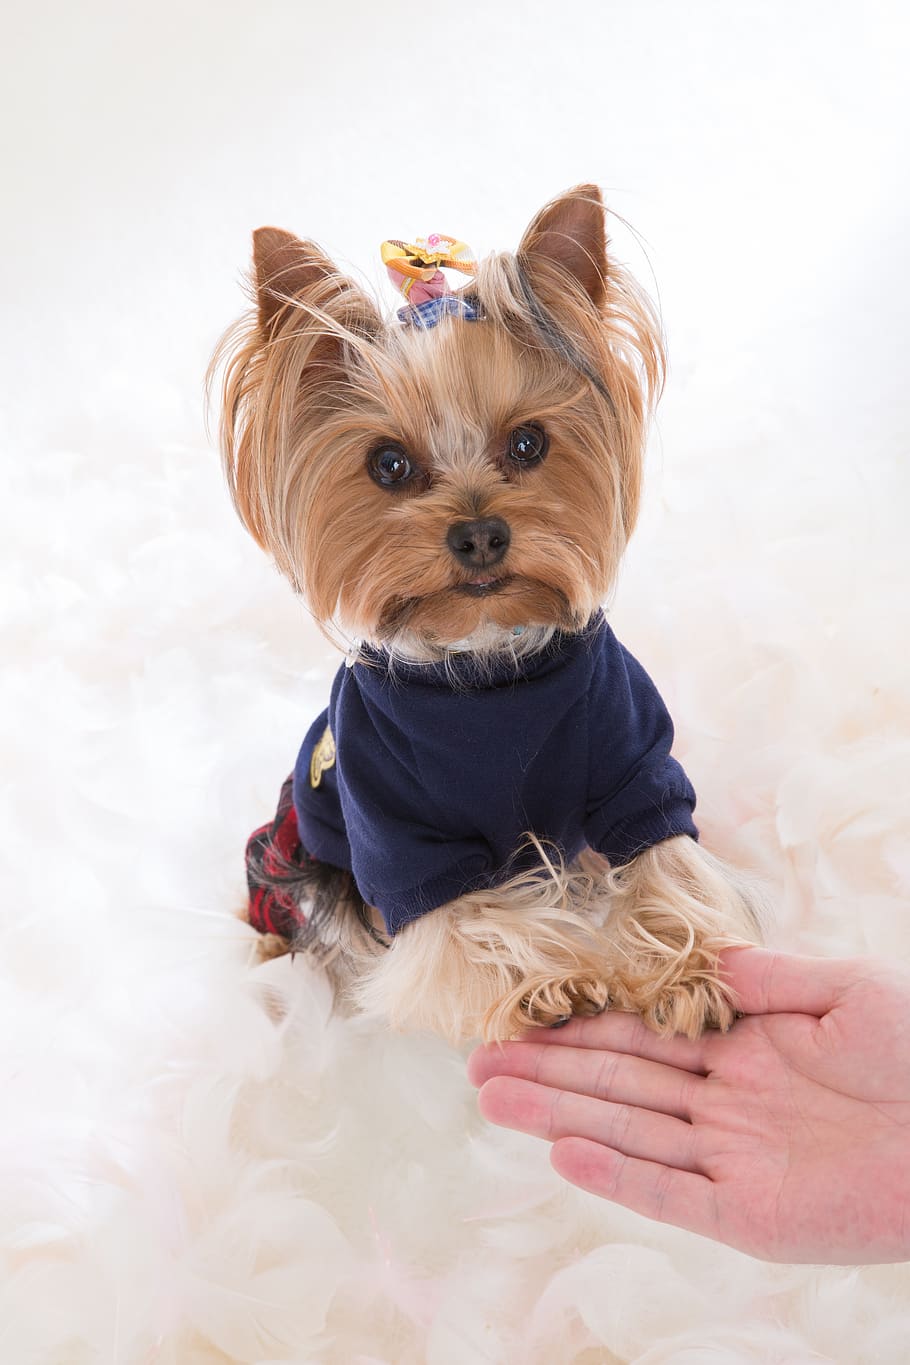 yorkshire terrier, dog, one, yorkie, leia, address, pets, domestic animals, canine, one animal